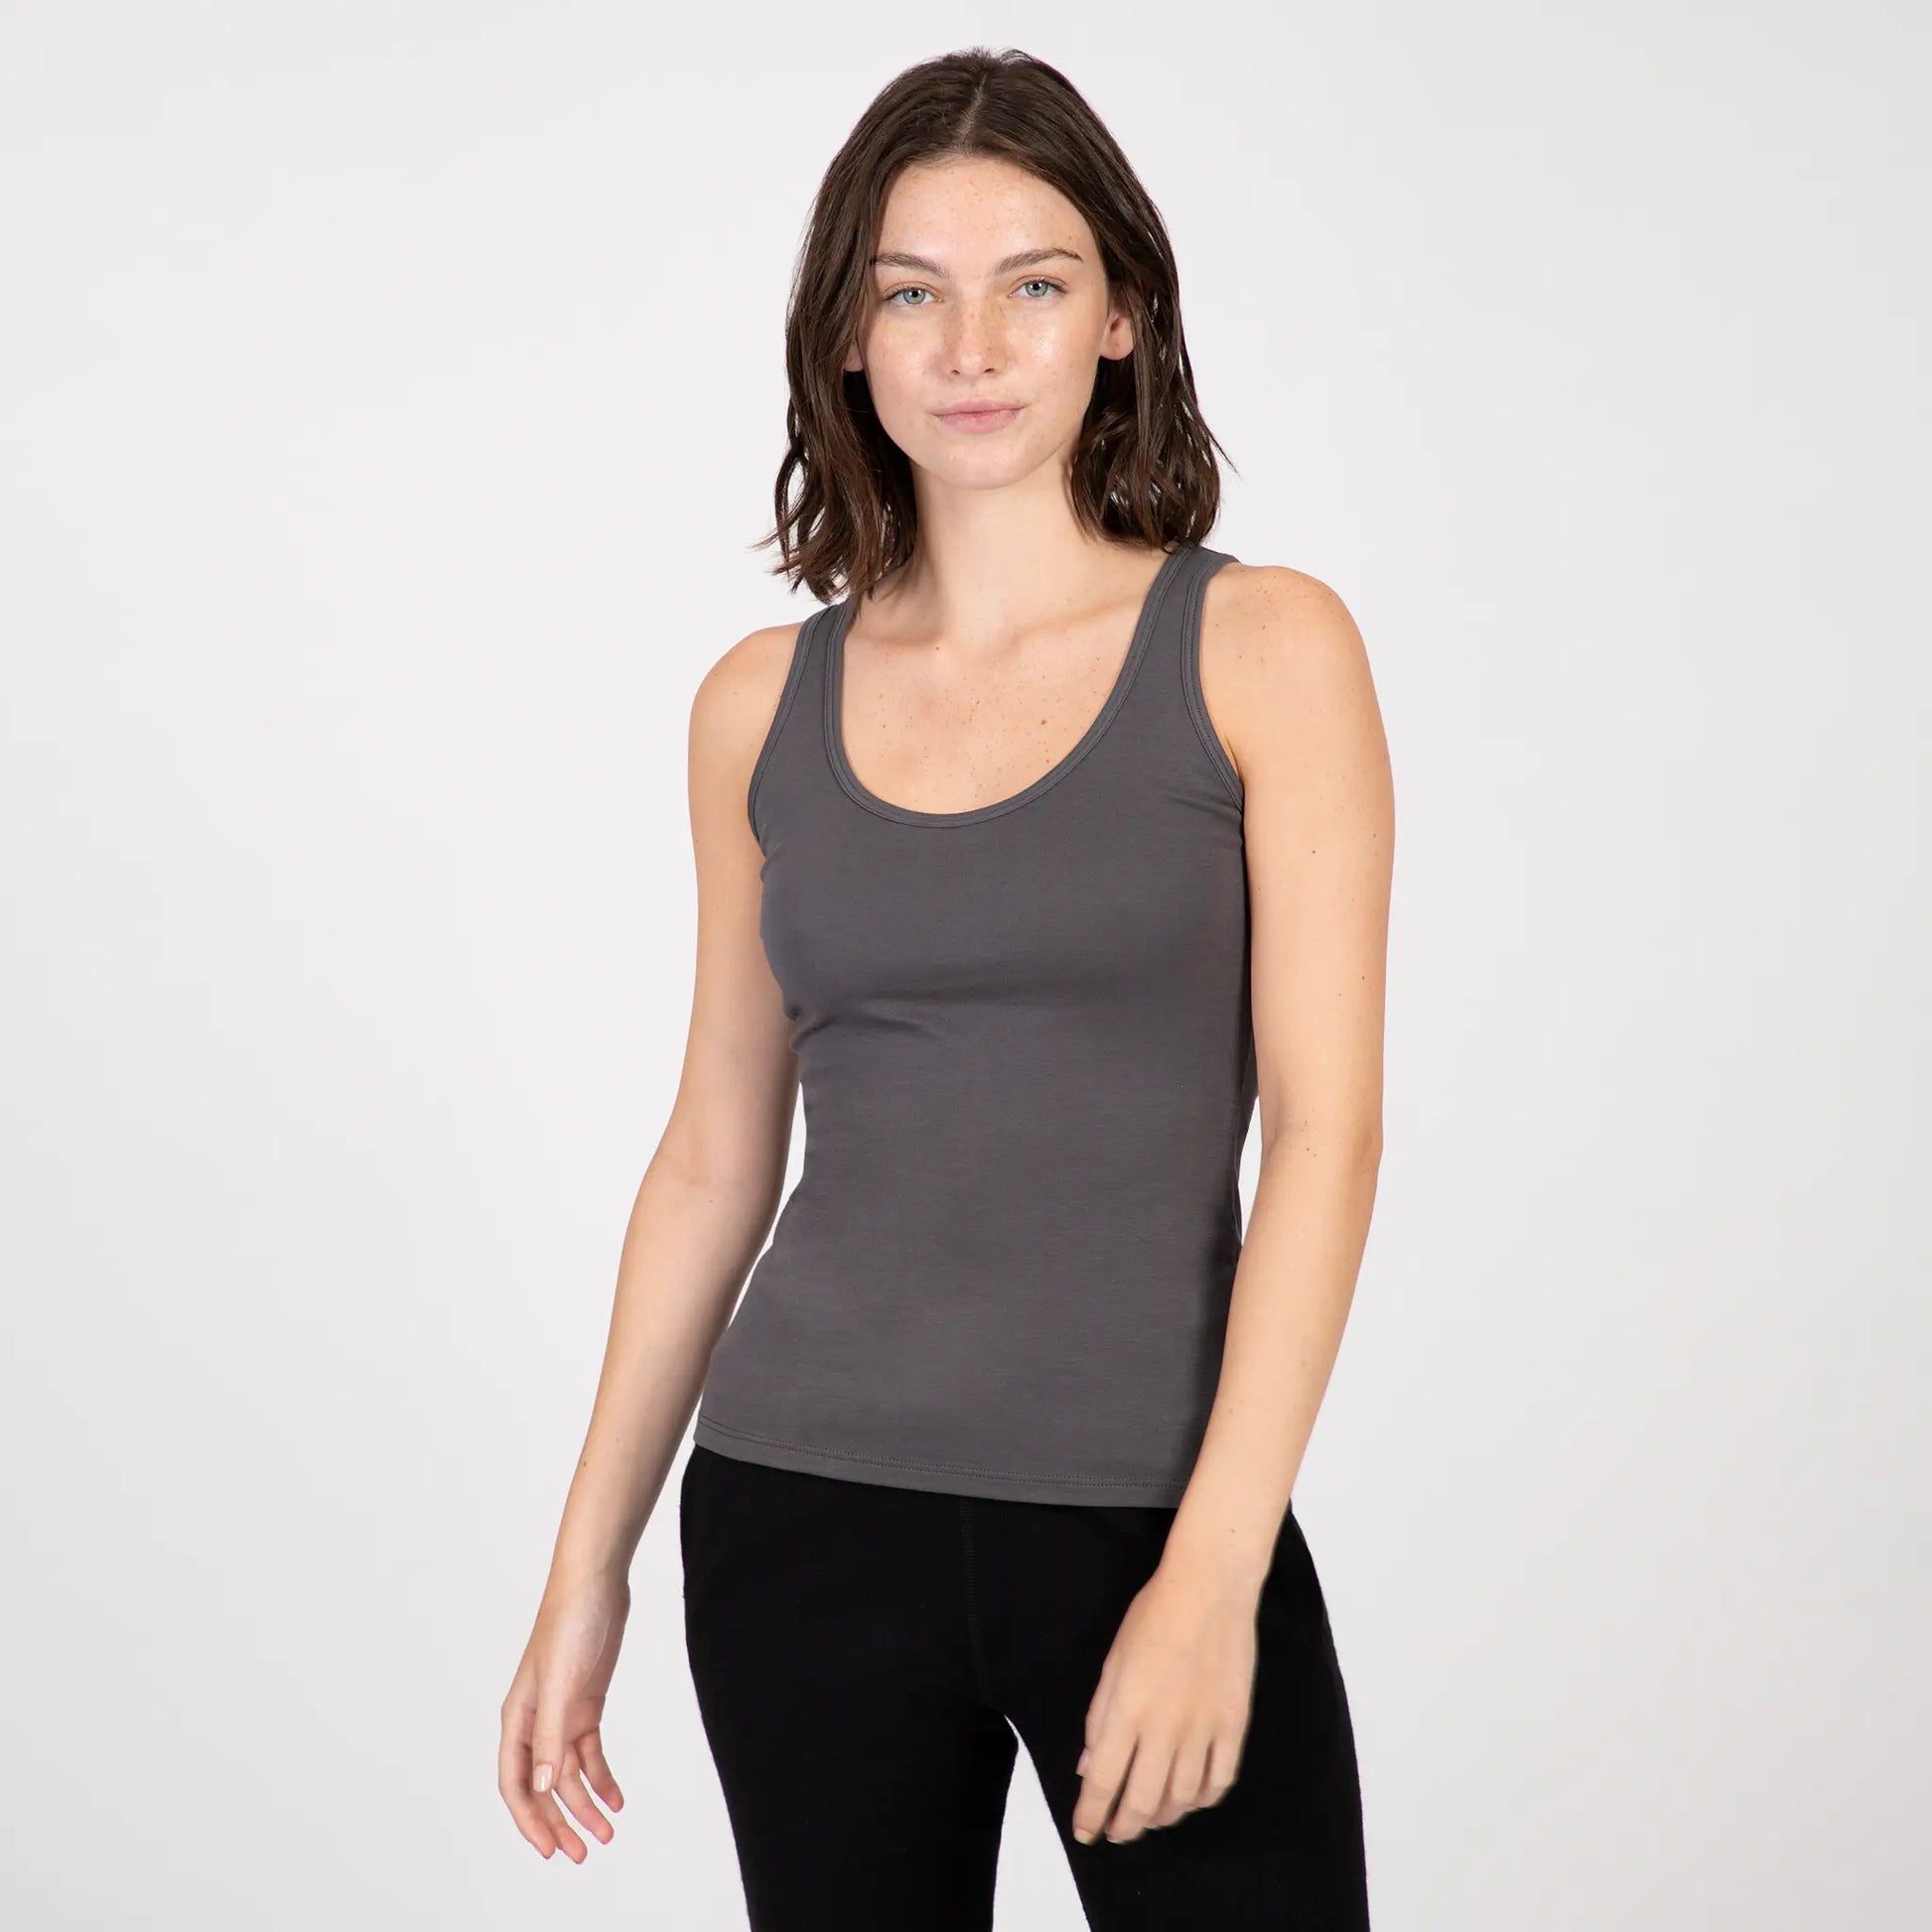 Mix 4 Pack - Women's Organic Crew Neck, V-Neck, Tank Top, & Long Sleeve cover